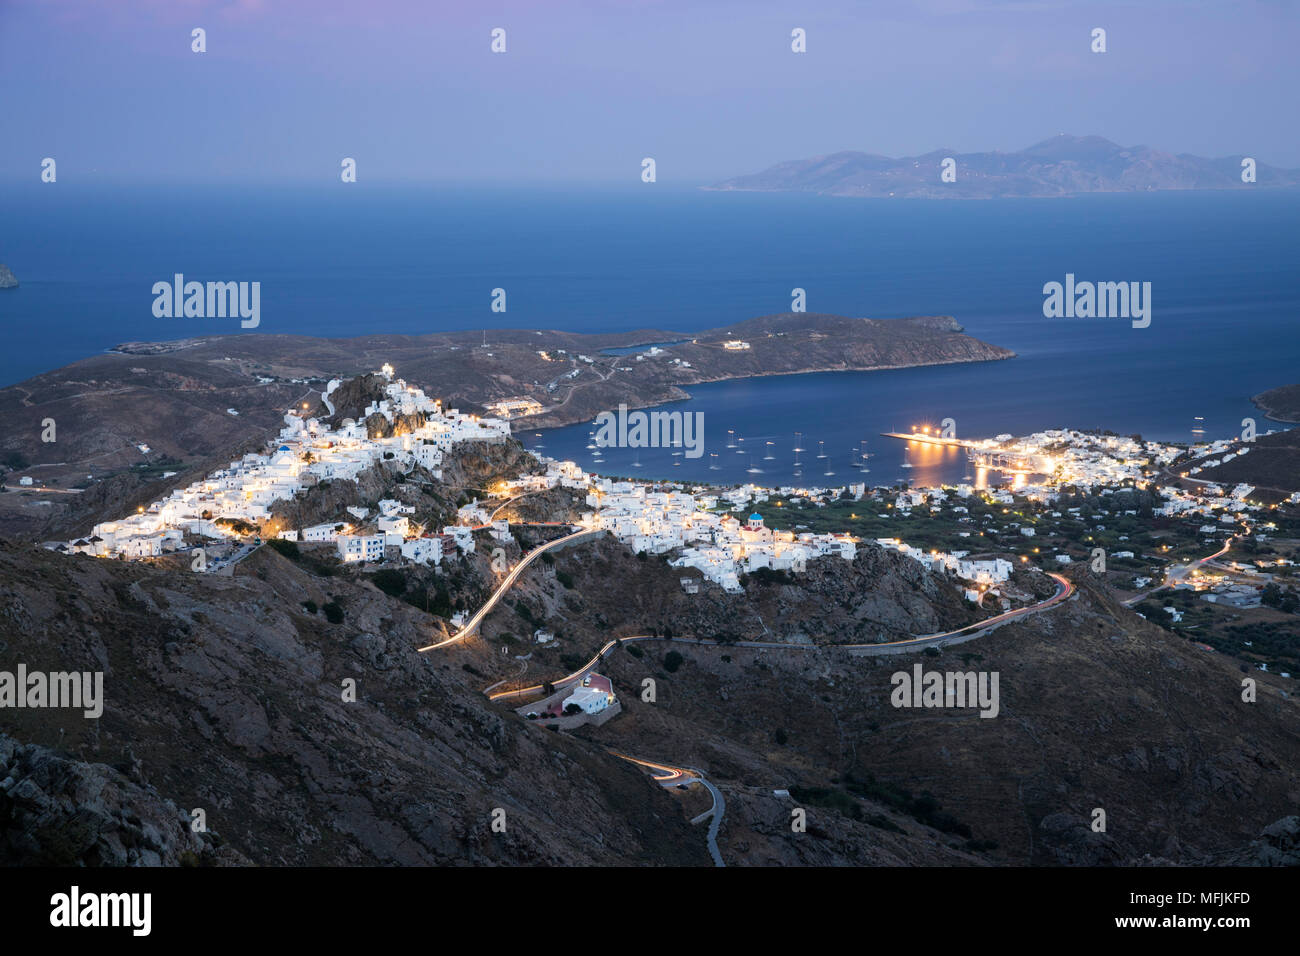 View over Livadi Bay and hilltop town of Pano Chora at night, Serifos, Cyclades, Aegean Sea, Greek Islands, Greece, Europe Stock Photo